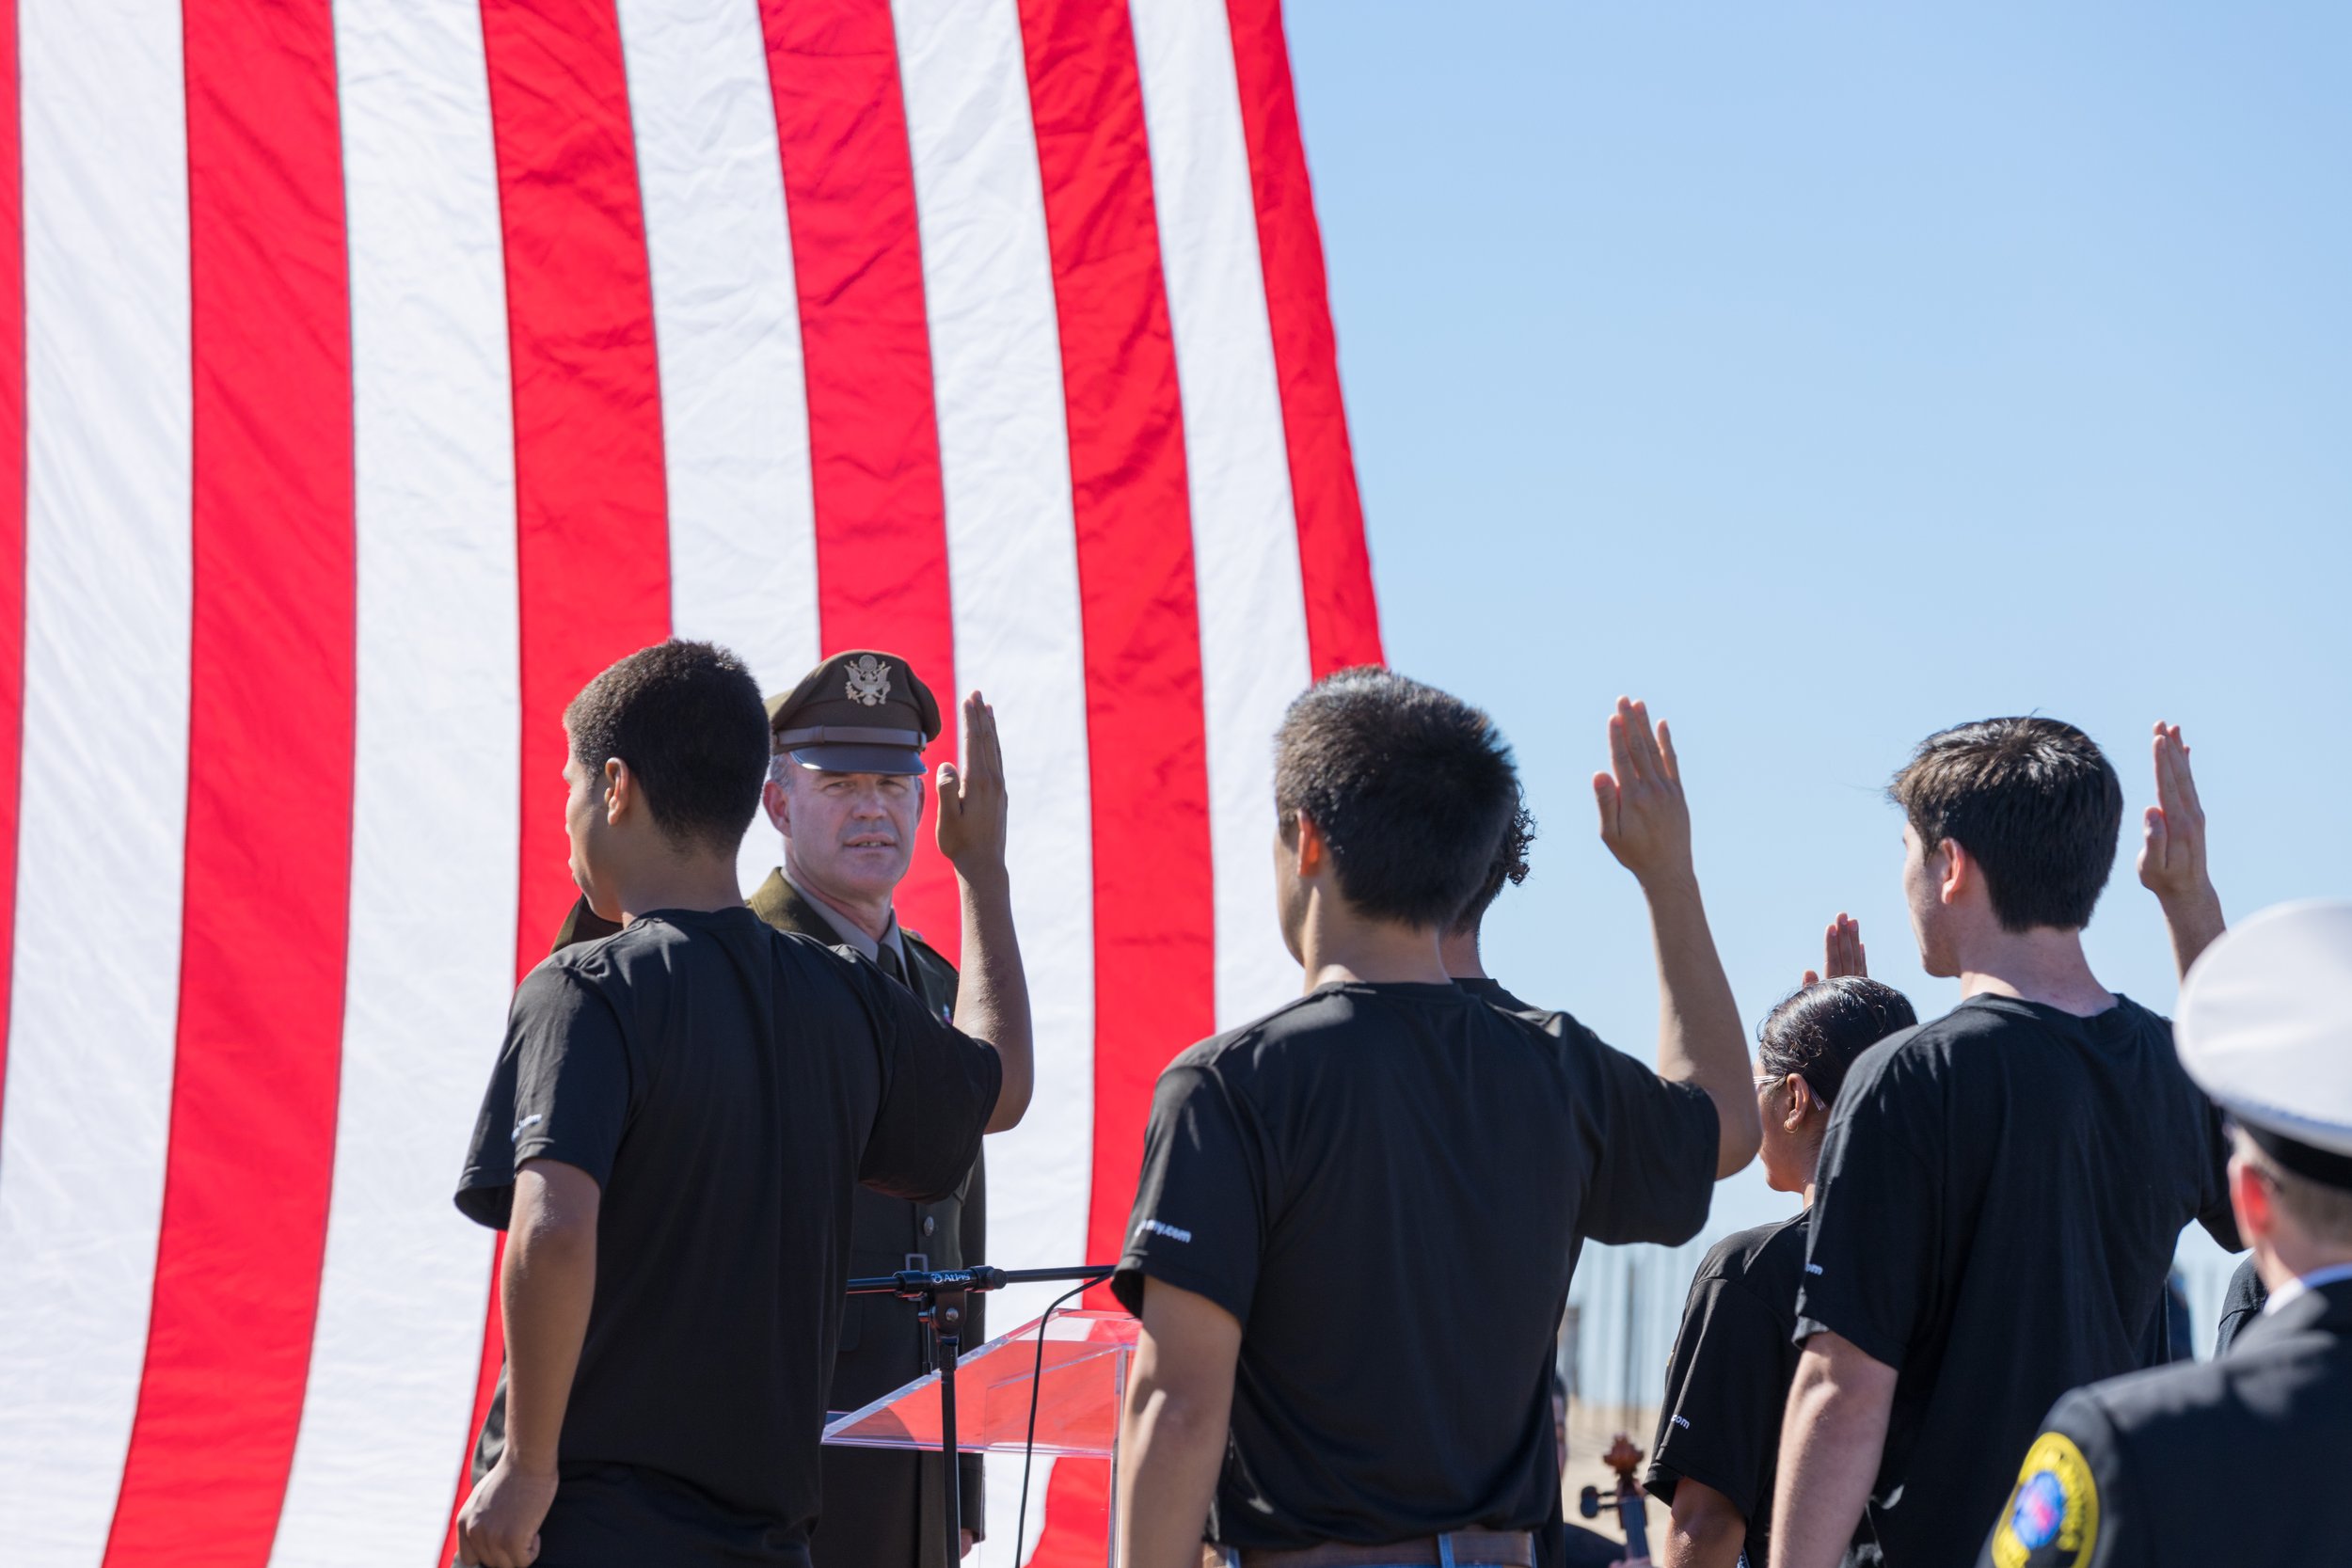  Future soldiers are sworn in by General Curtis Taylor of the US Army at the Veterans Day commemoration near the Santa Monica Pier in Santa Monica, California on November 11, 2021. (Maxim Elramsisy | The Corsair) 